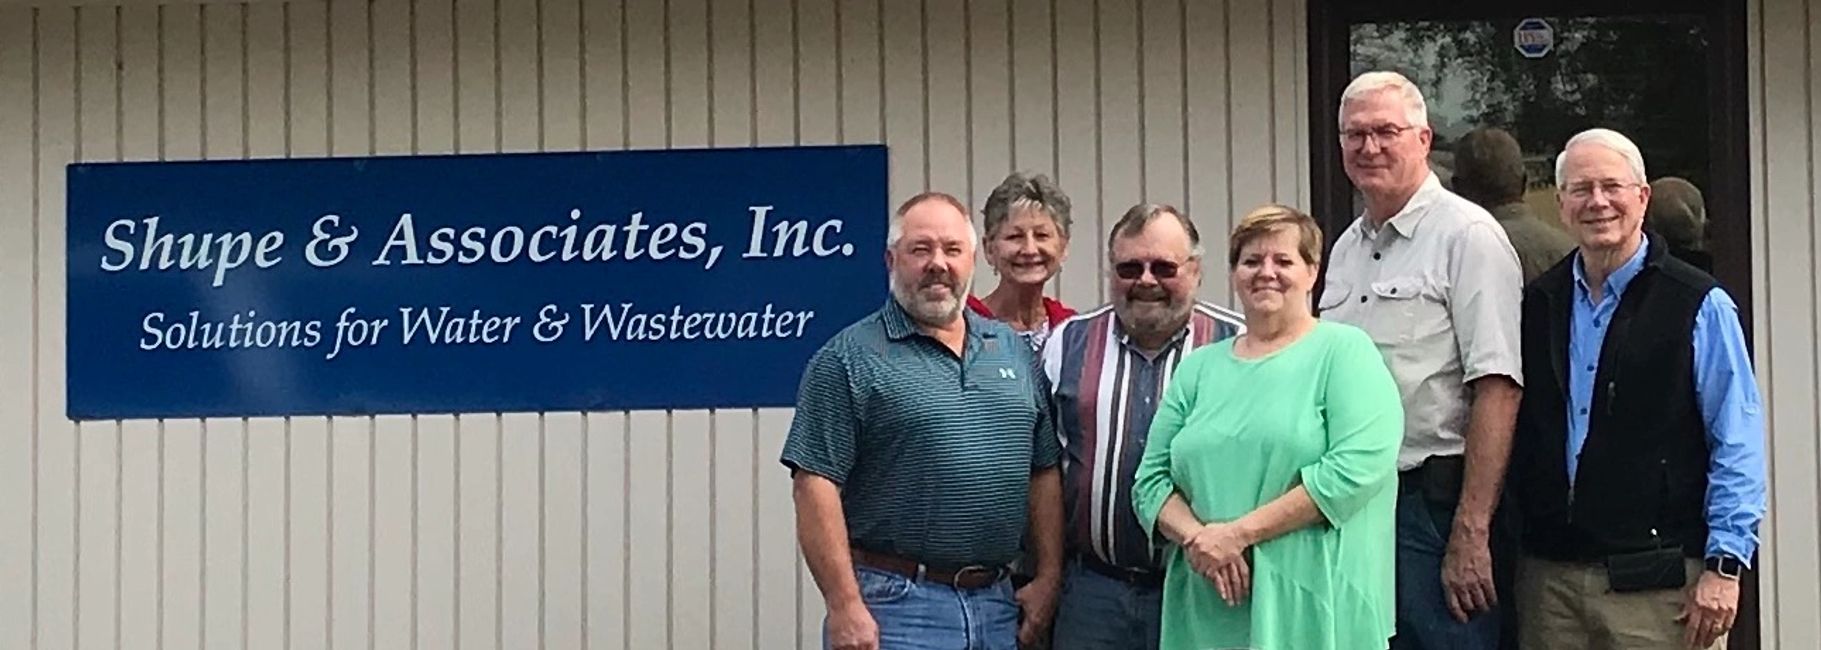 The Shupe and Associates wastewater solutions team